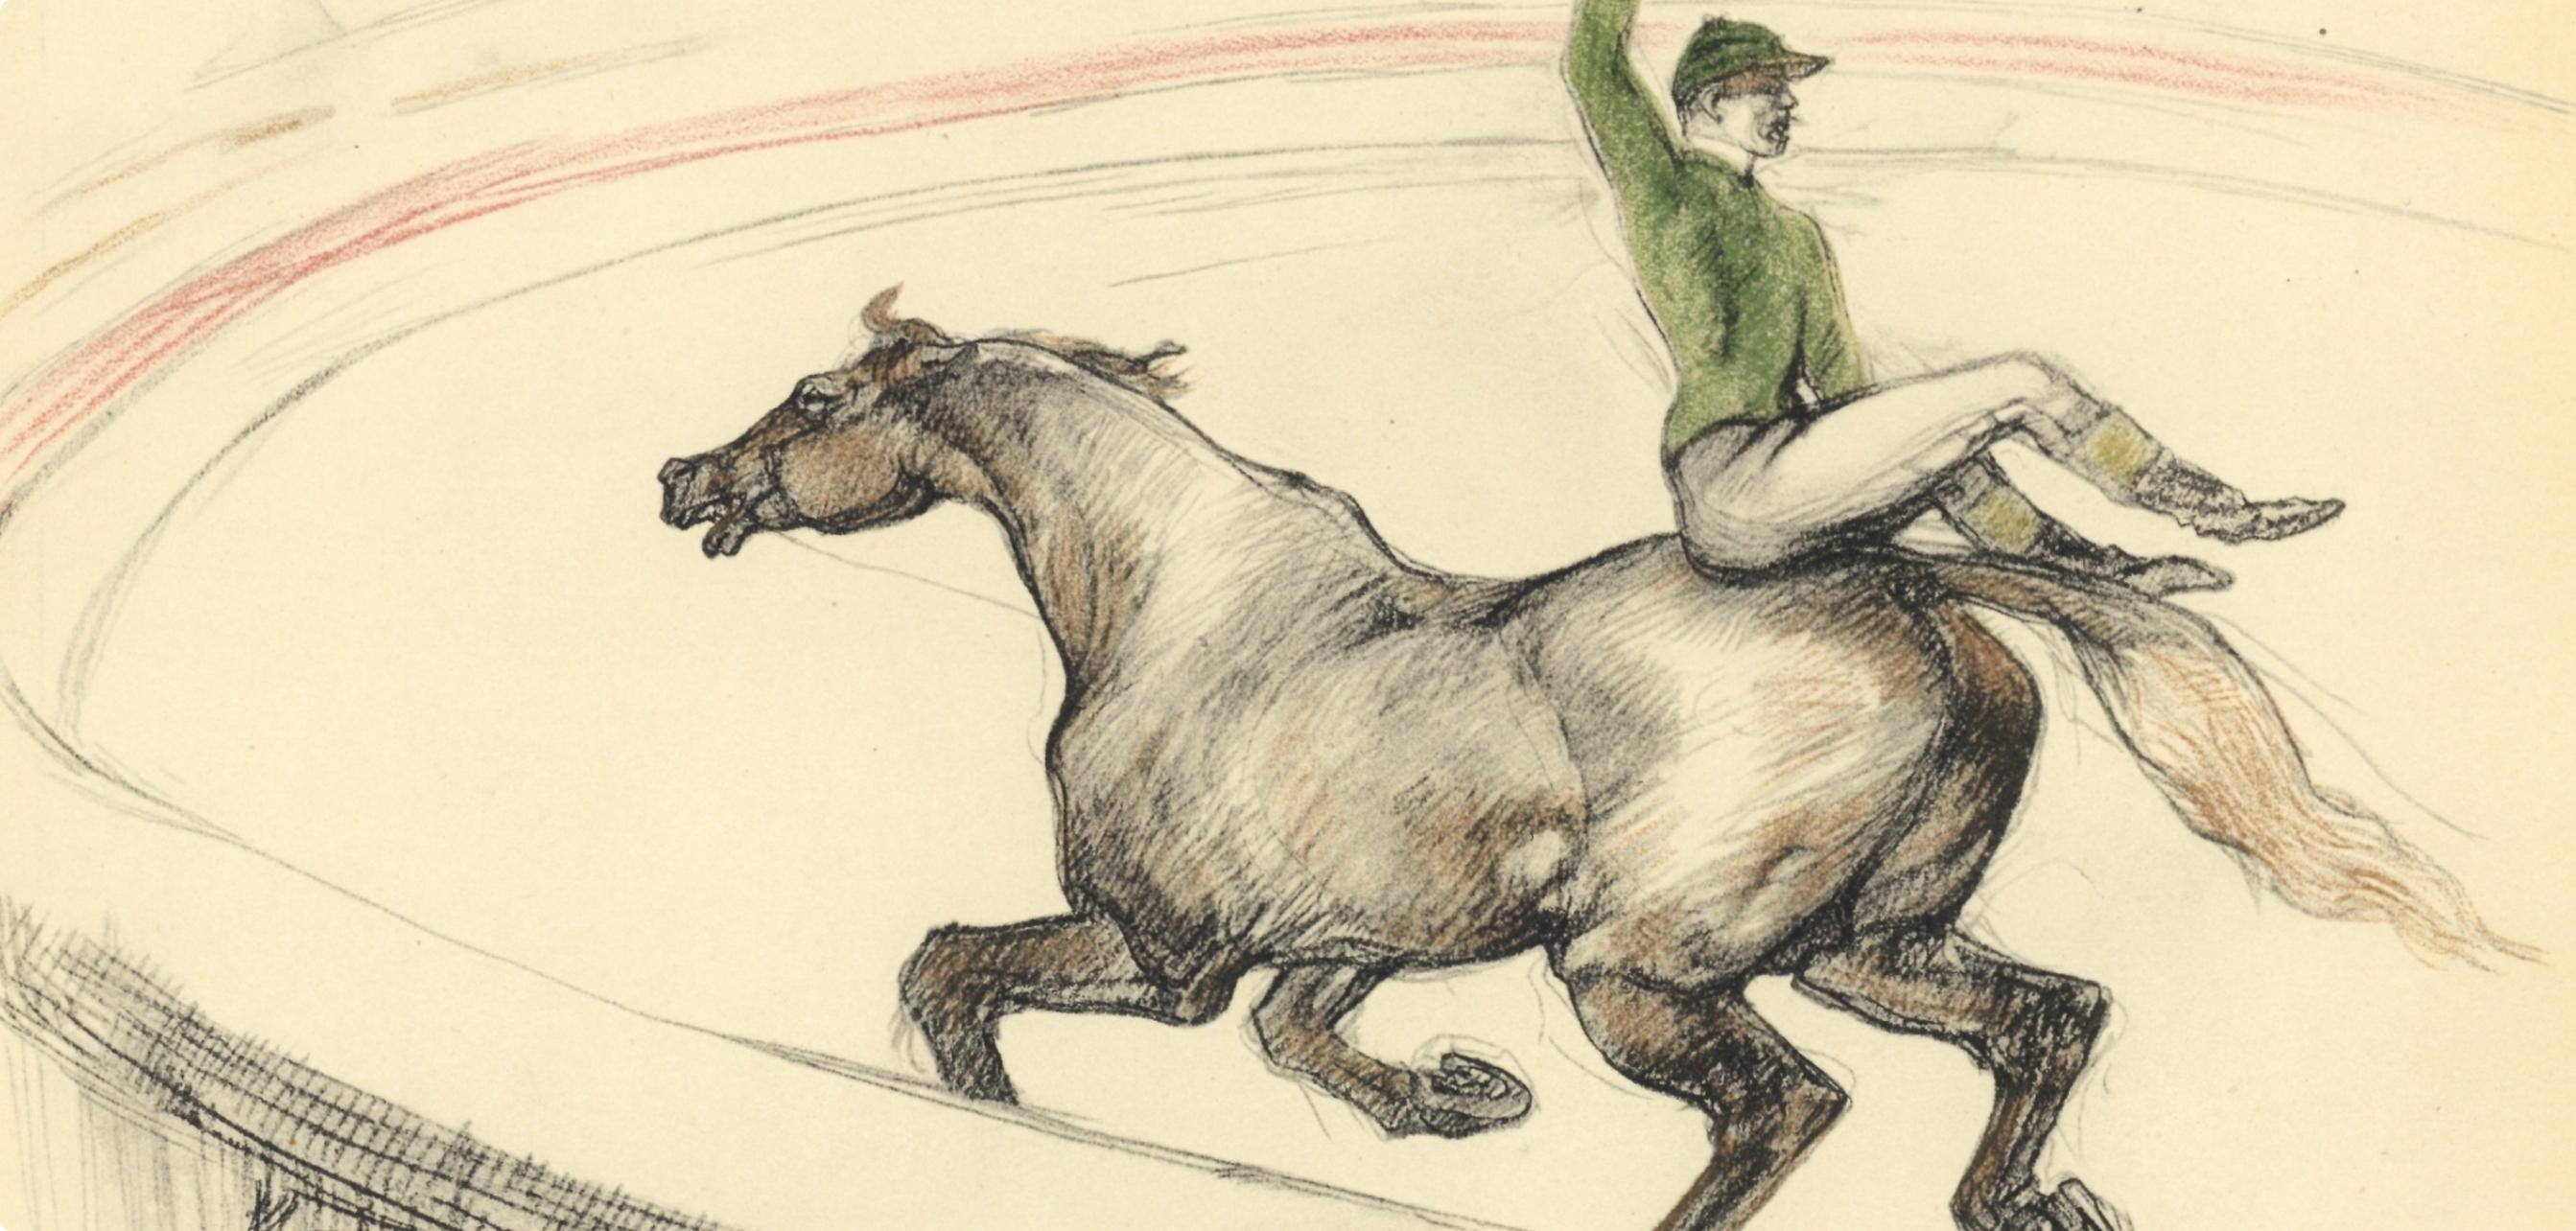 Toulouse-Lautrec, Jockey, The Circus by Toulouse-Lautrec (after) - Print by Henri de Toulouse-Lautrec